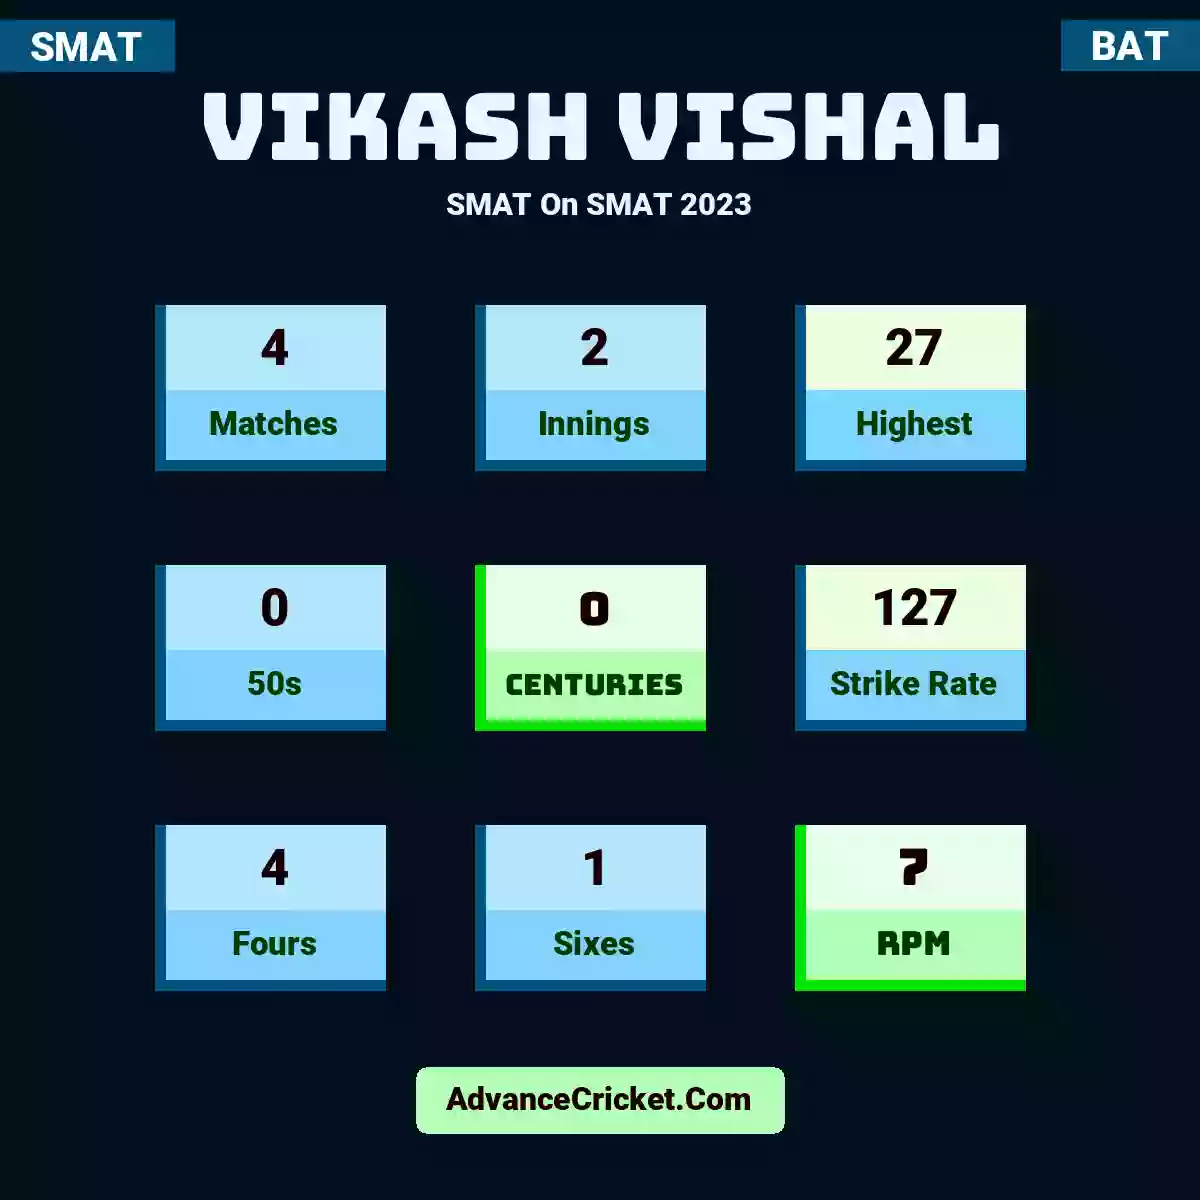 Vikash Vishal SMAT  On SMAT 2023, Vikash Vishal played 4 matches, scored 27 runs as highest, 0 half-centuries, and 0 centuries, with a strike rate of 127. V.Vishal hit 4 fours and 1 sixes, with an RPM of 7.